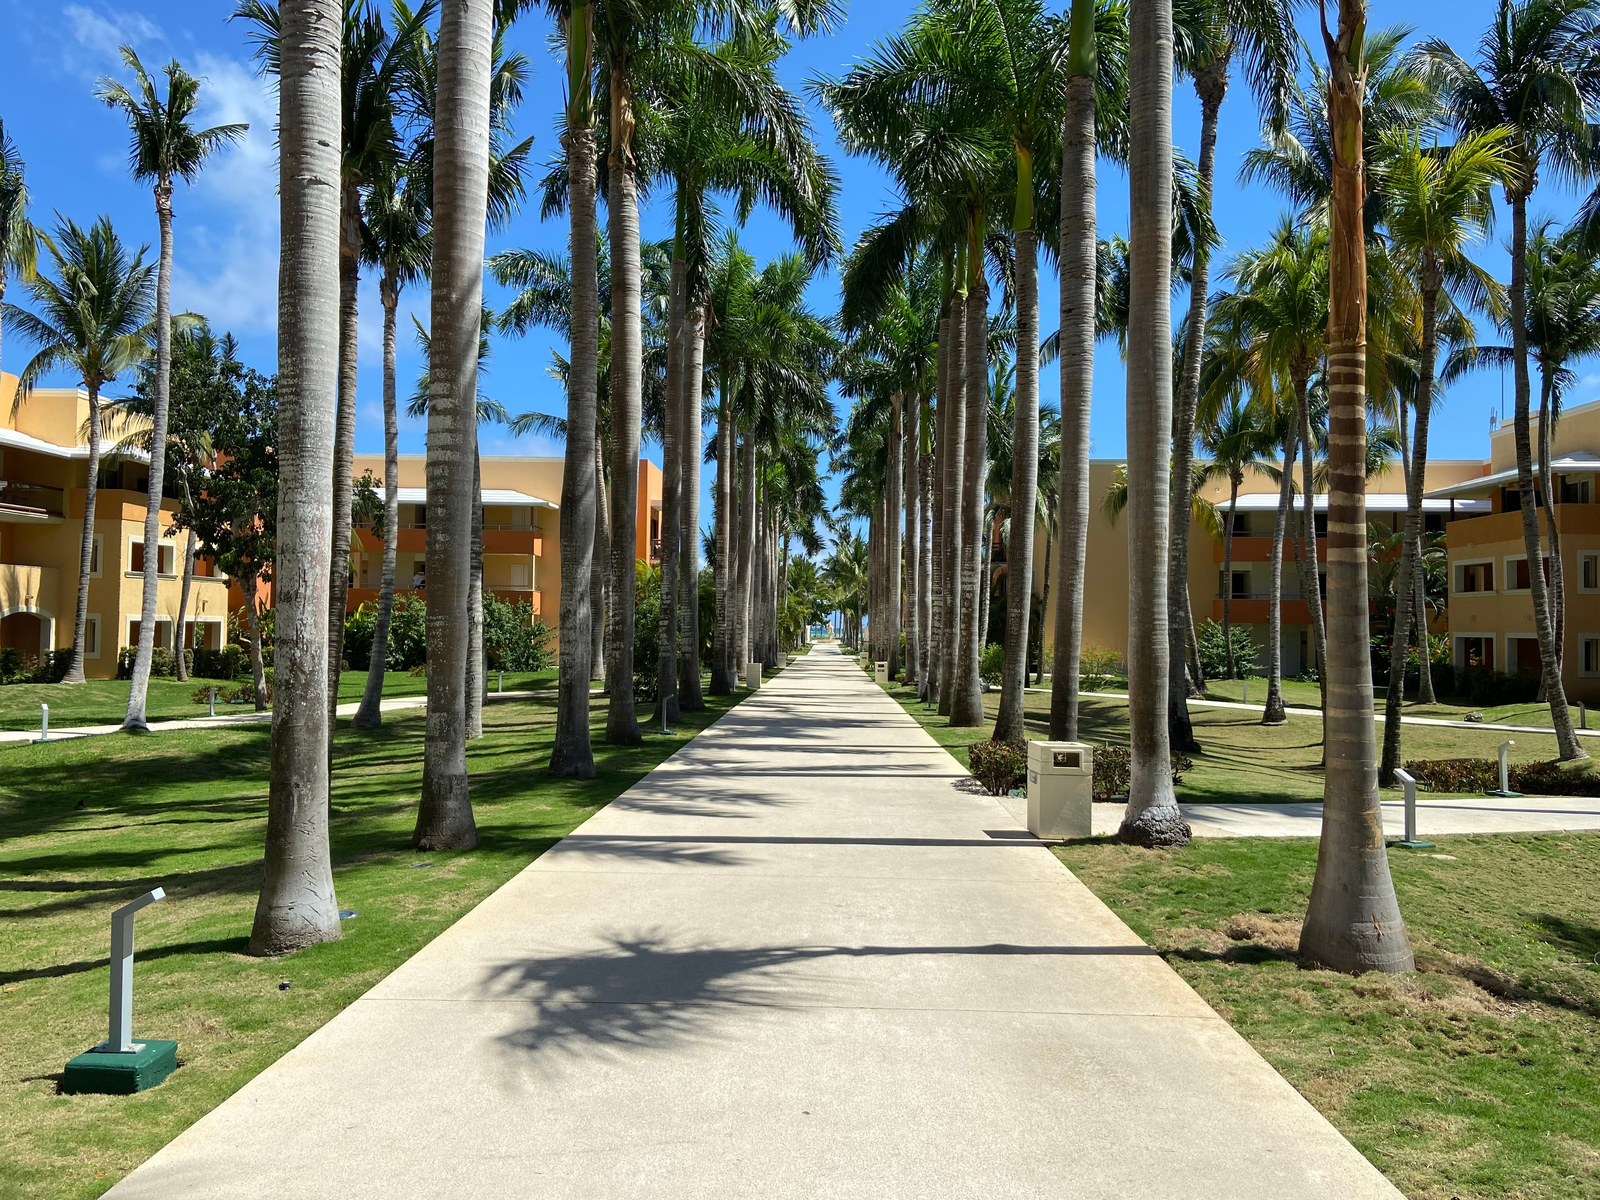 A perfectly straight footpath lined with palm trees at the grounds of Barceló Maya Beach Resort, considered as one of the best all-inclusive resorts in Mexico